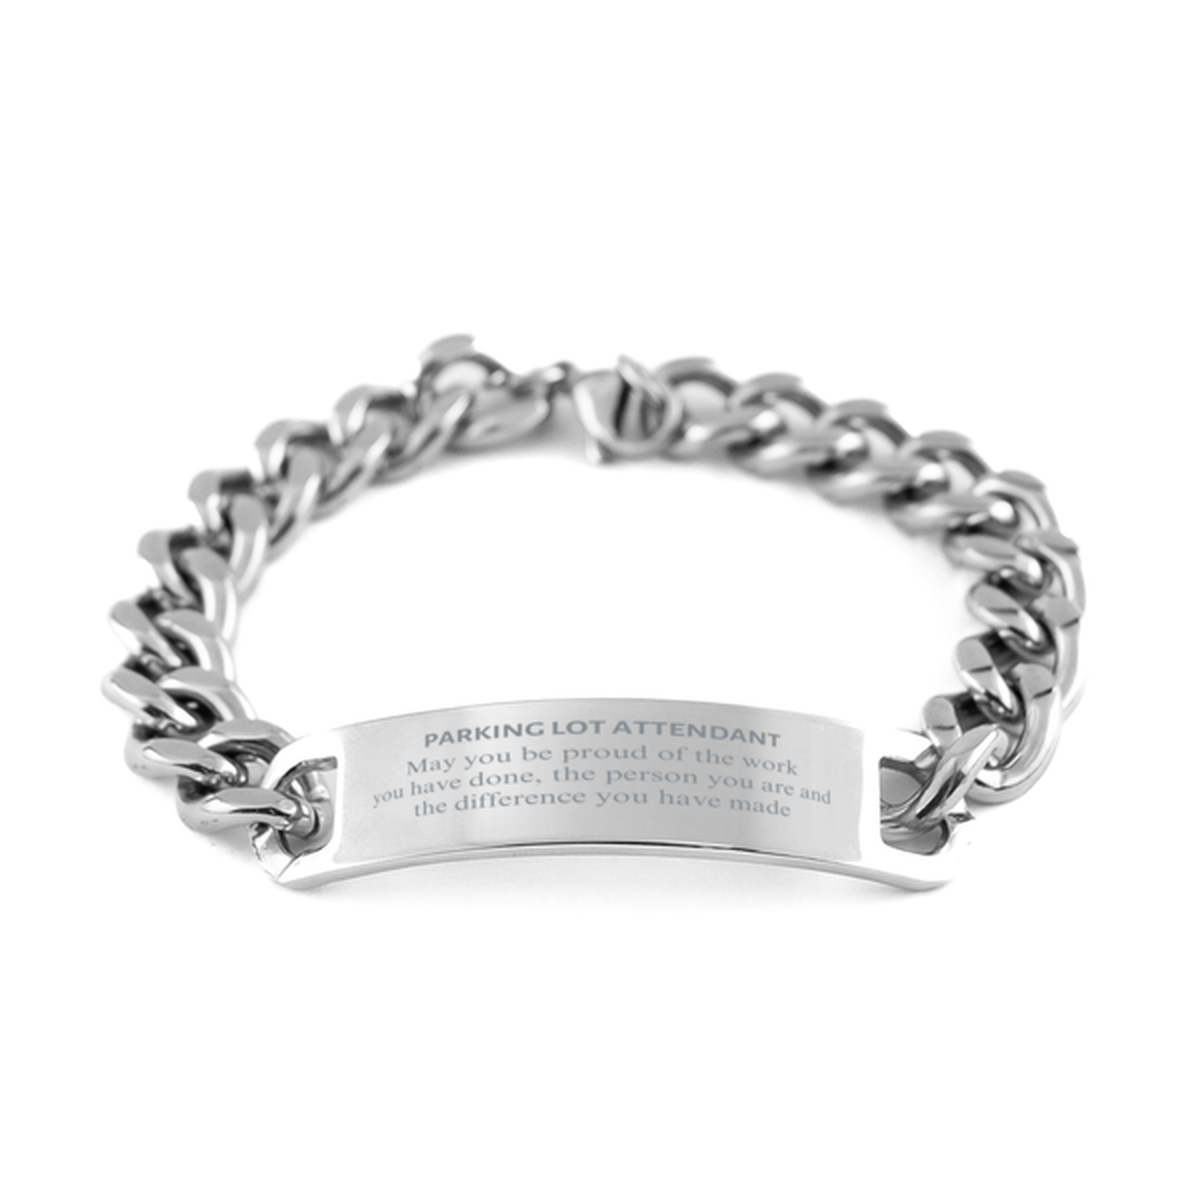 Parking Lot Attendant May you be proud of the work you have done, Retirement Parking Lot Attendant Cuban Chain Stainless Steel Bracelet for Colleague Appreciation Gifts Amazing for Parking Lot Attendant